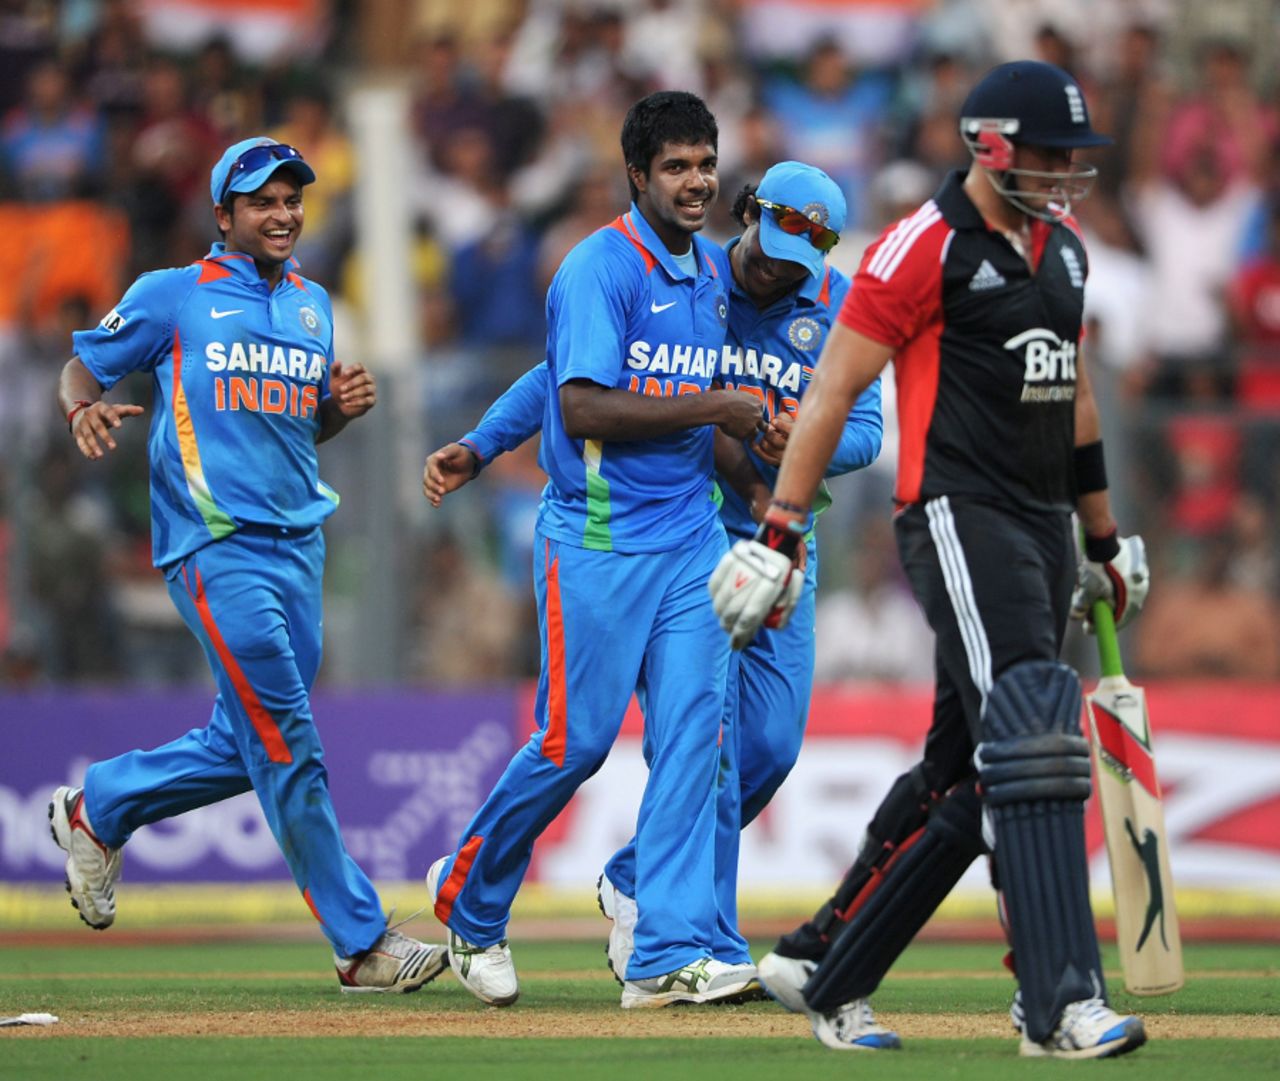 Varun Aaron ended England's innings with the wicket of Tim Bresnan, India v England, 4th ODI, Mumbai, October 23, 2011